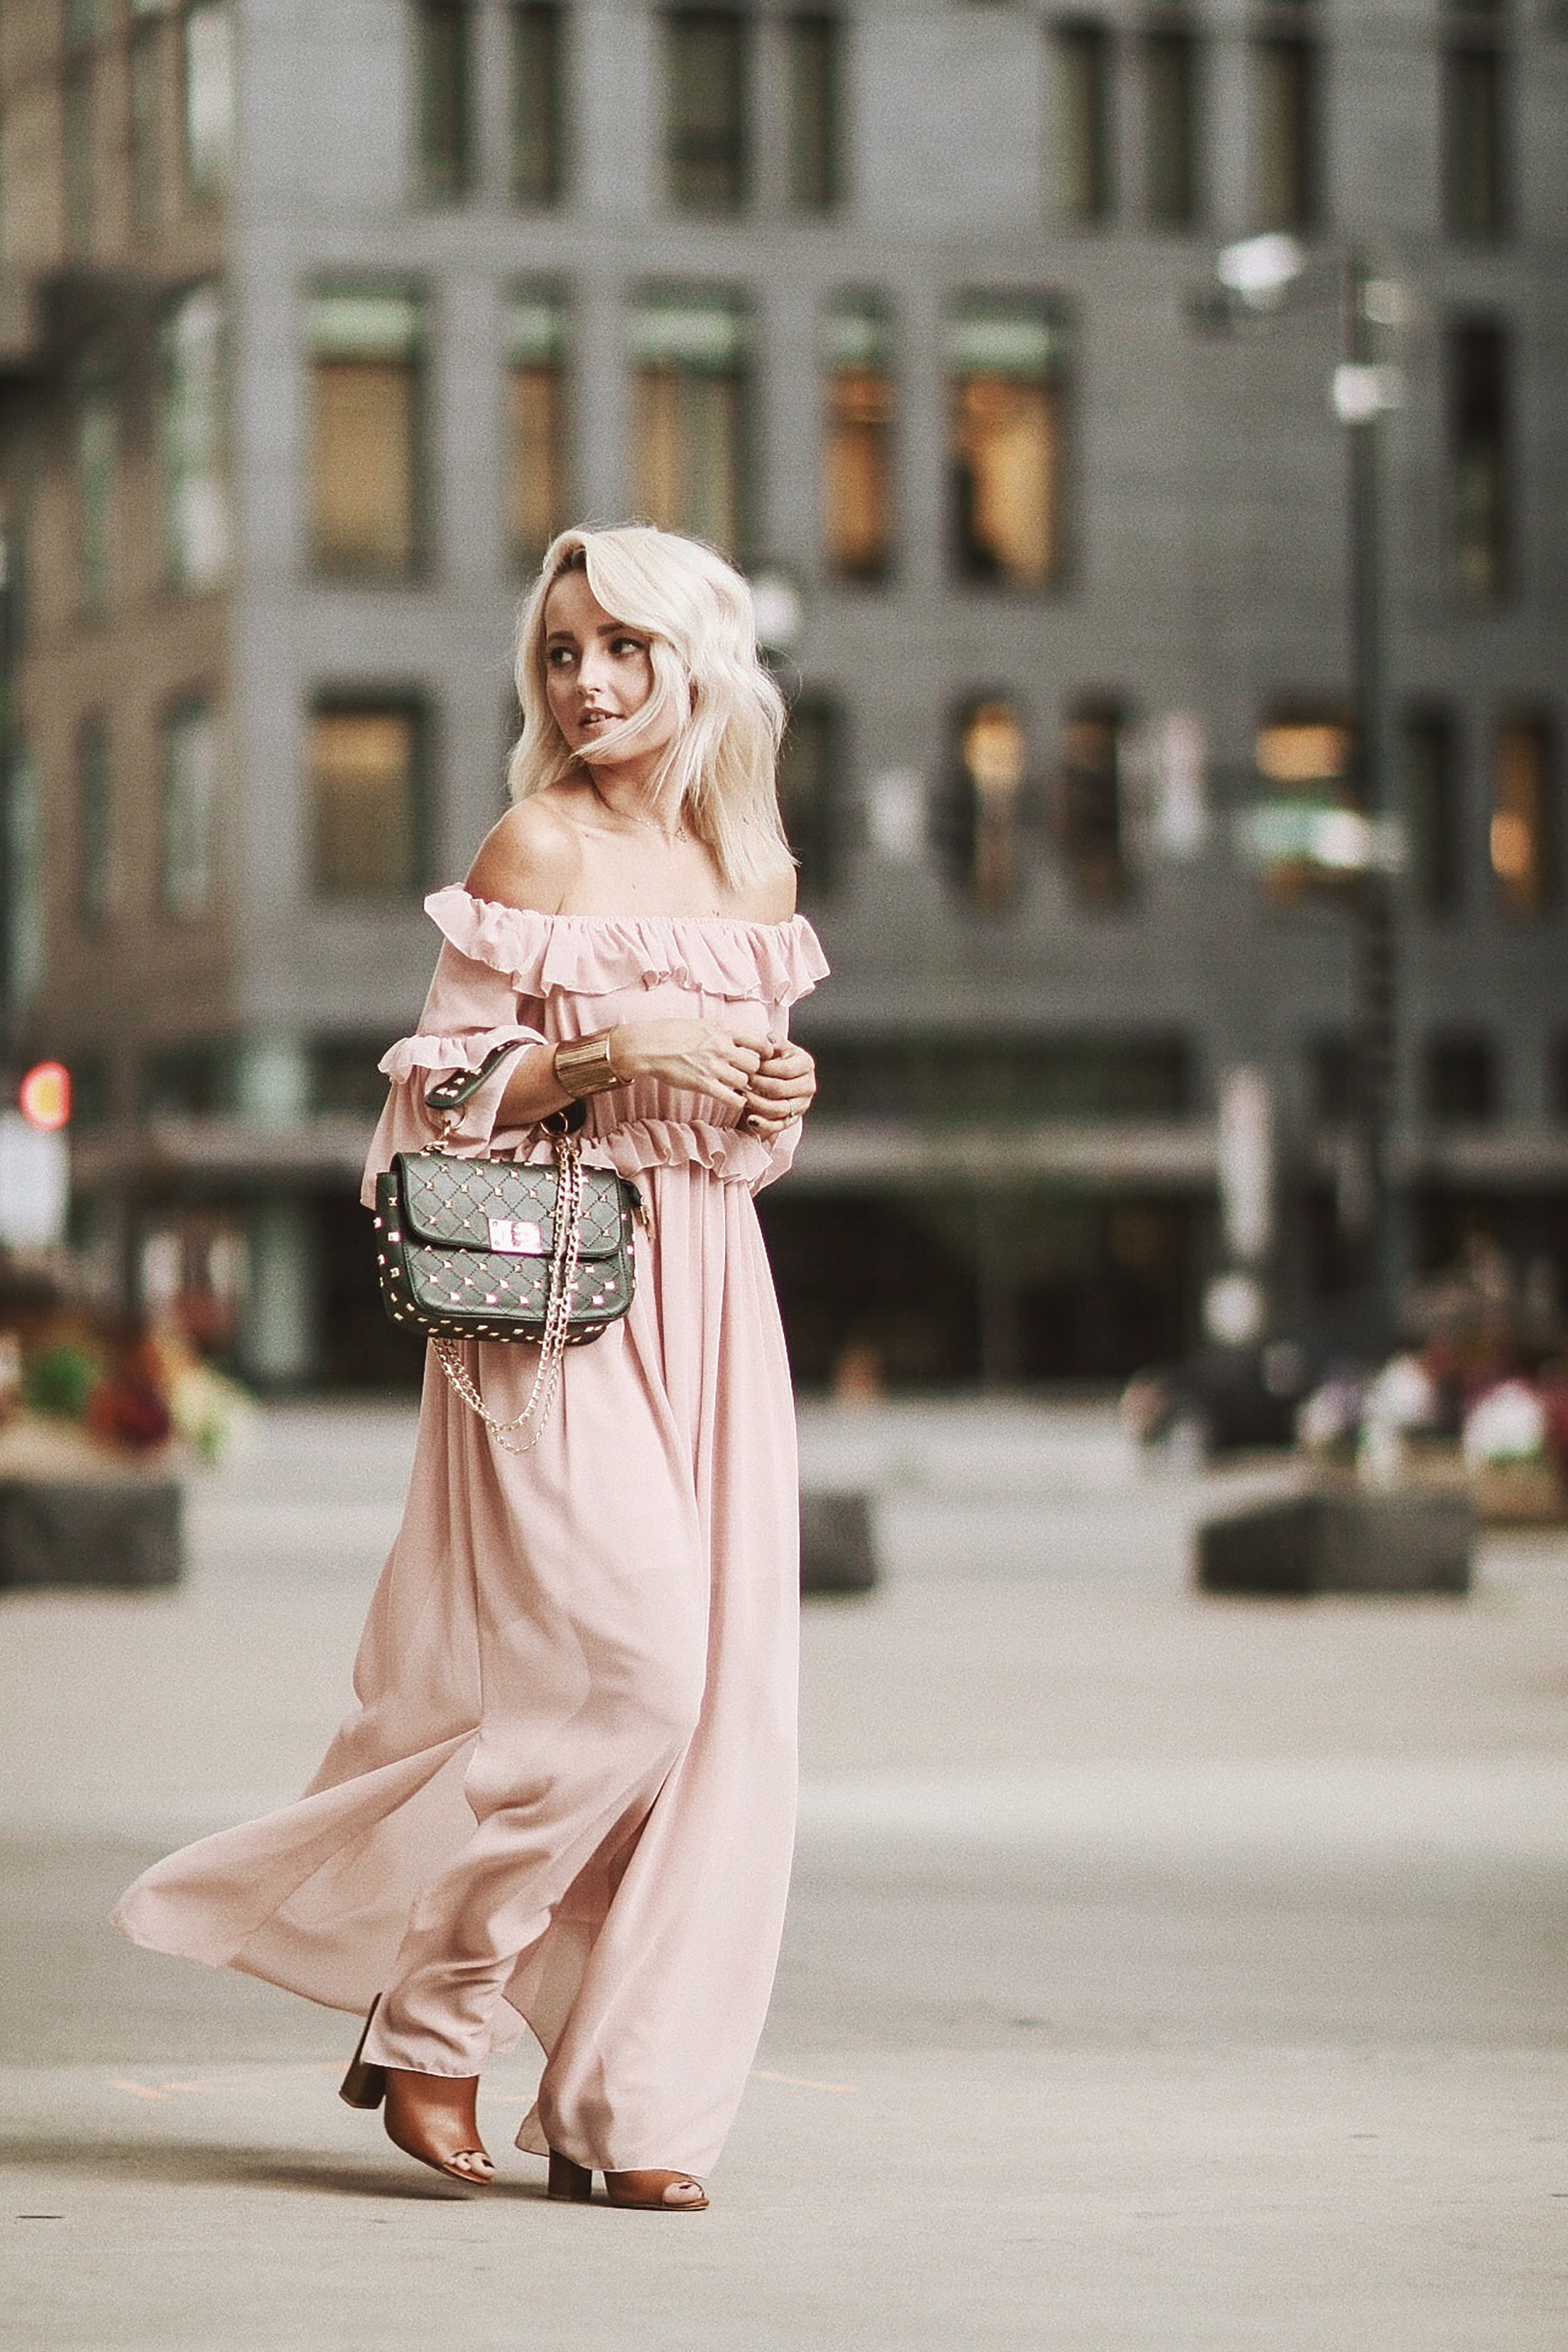 Alena Gidenko shares tips on how to style a dress for a Fall Wedding